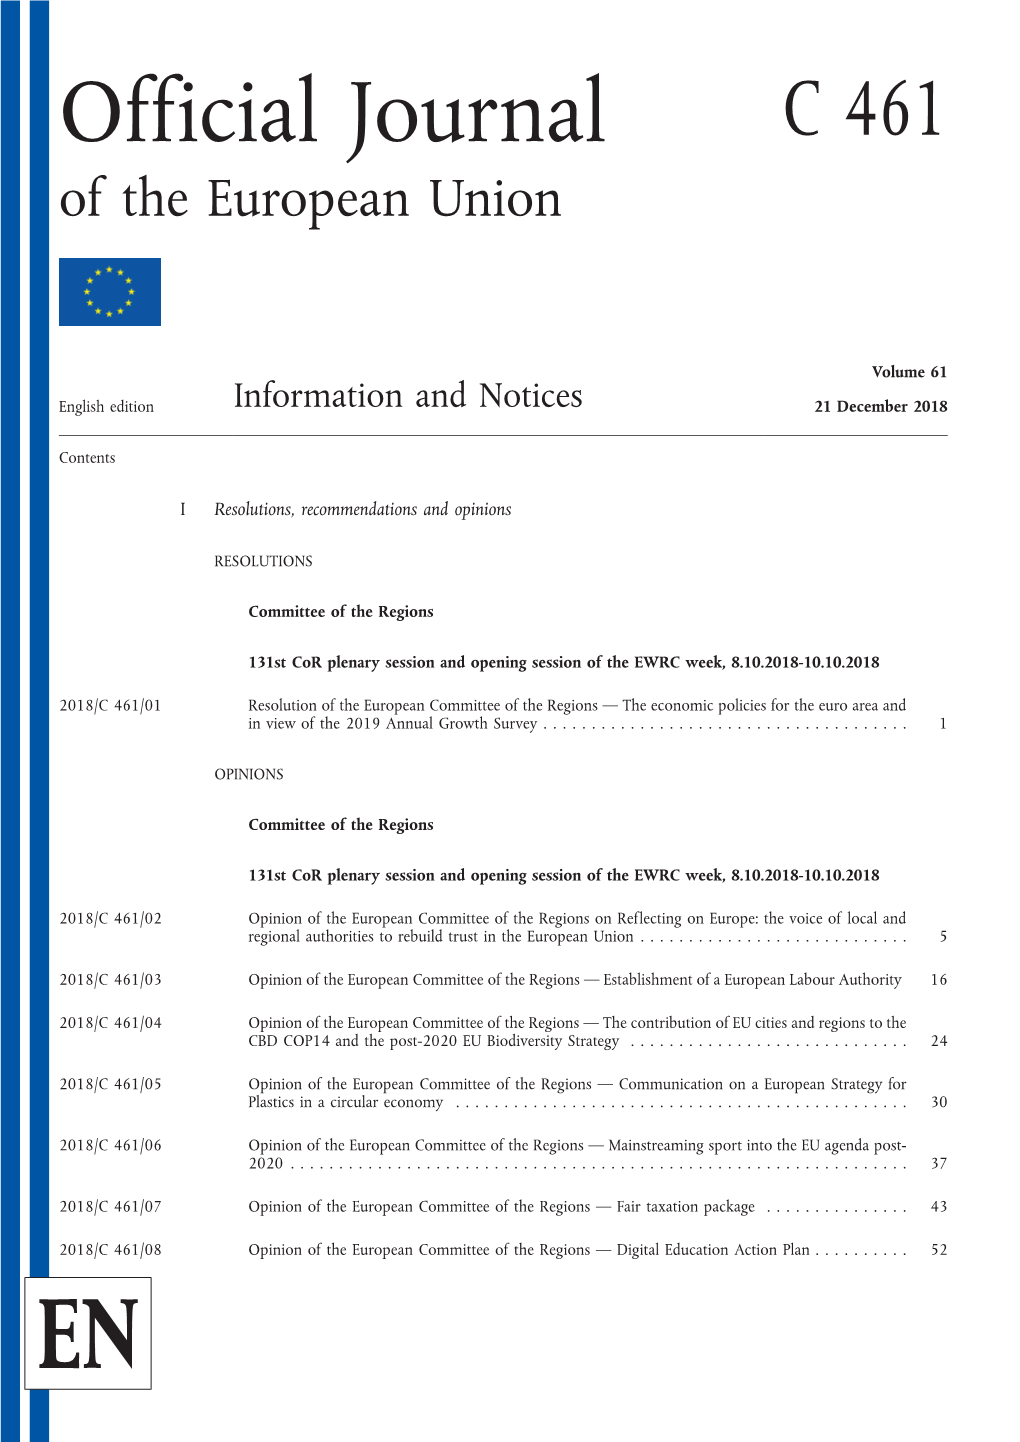 Official Journal of the European Union C 461/1